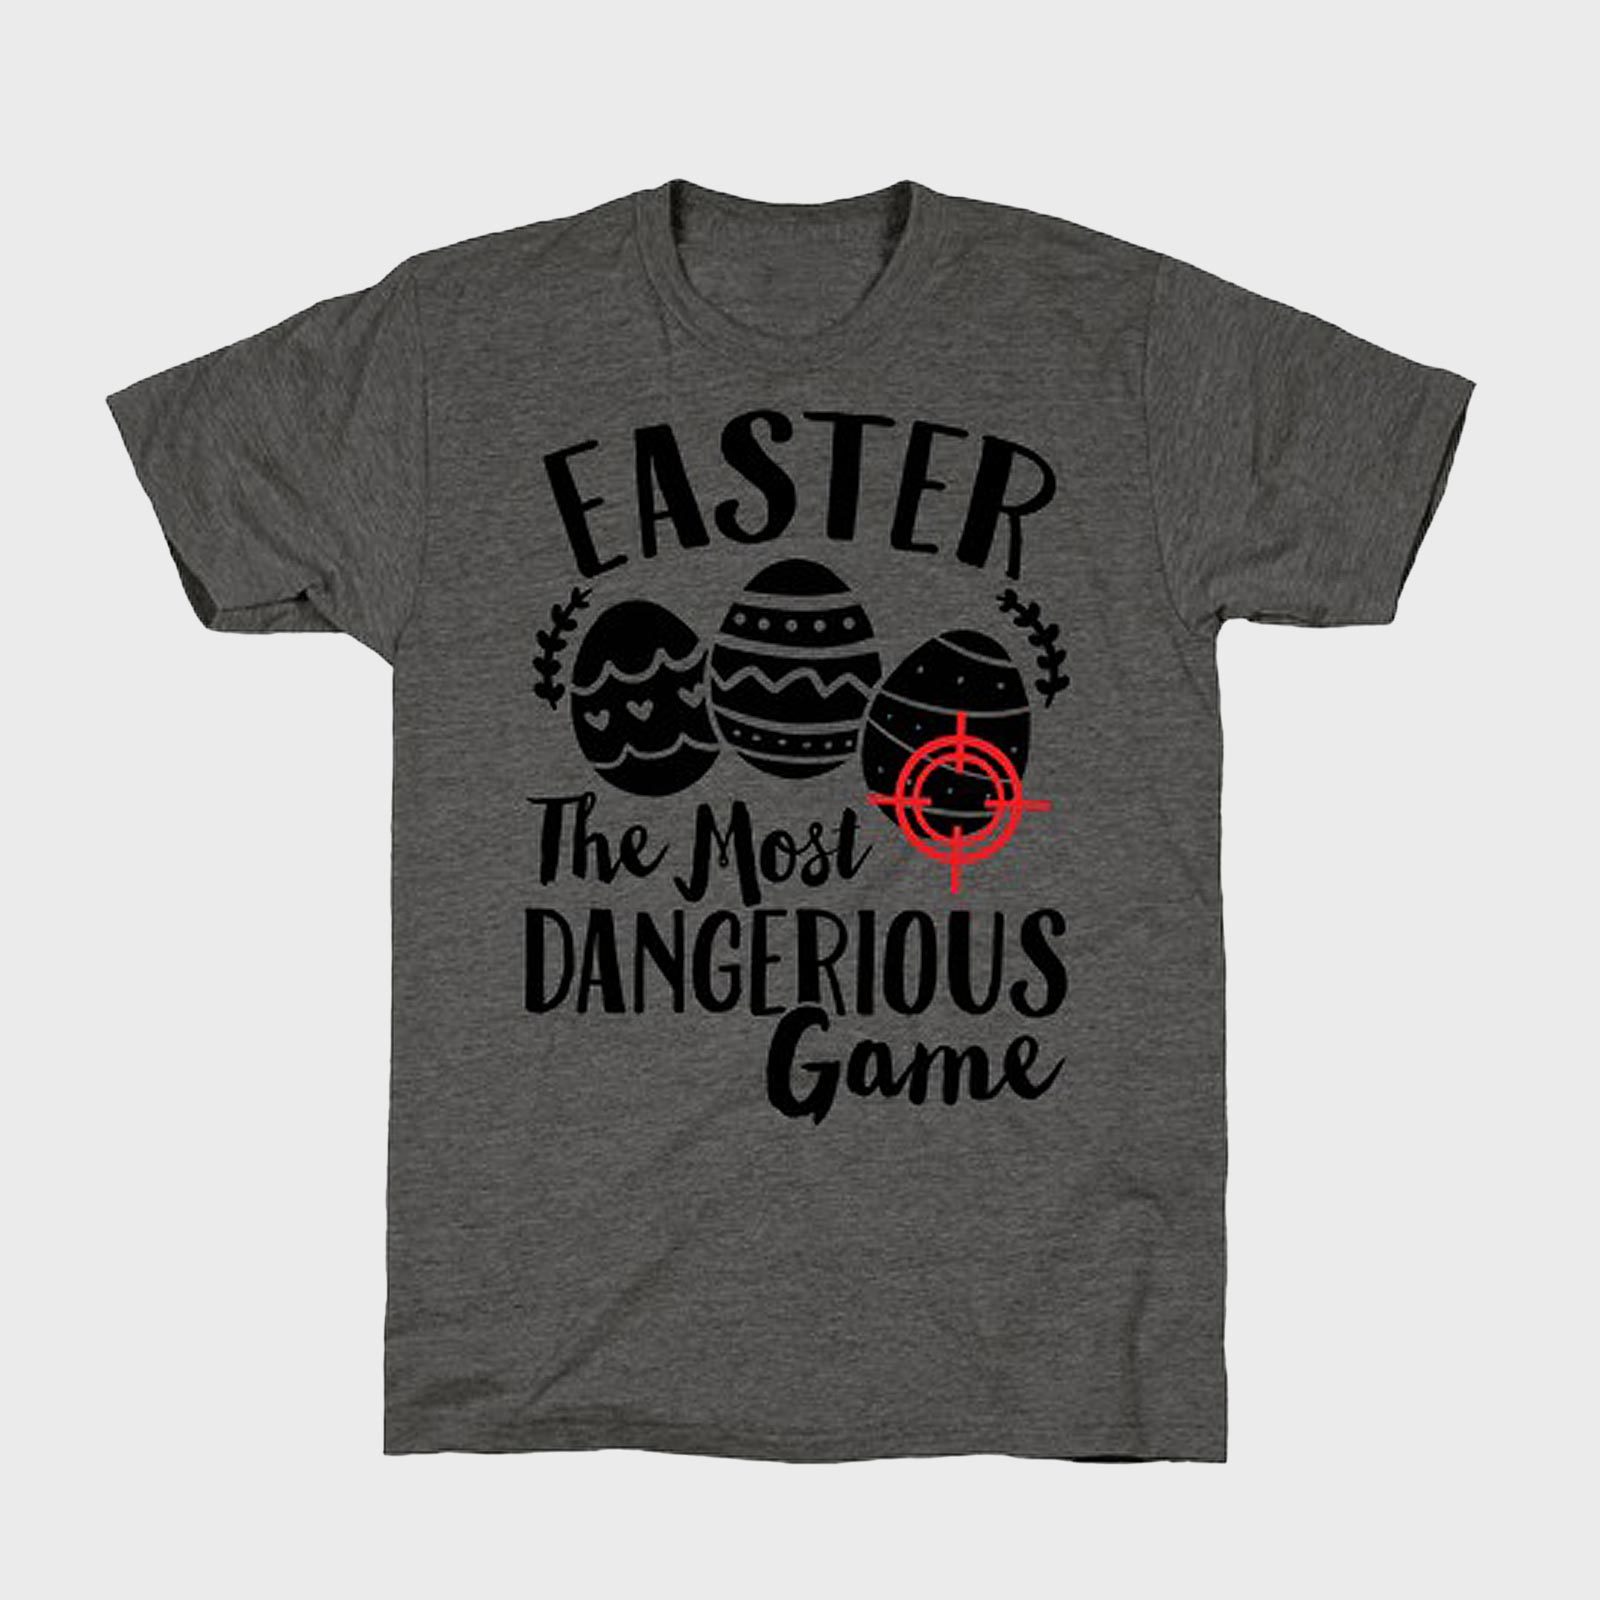 Easter The Most Dangerous Game T Shirt 